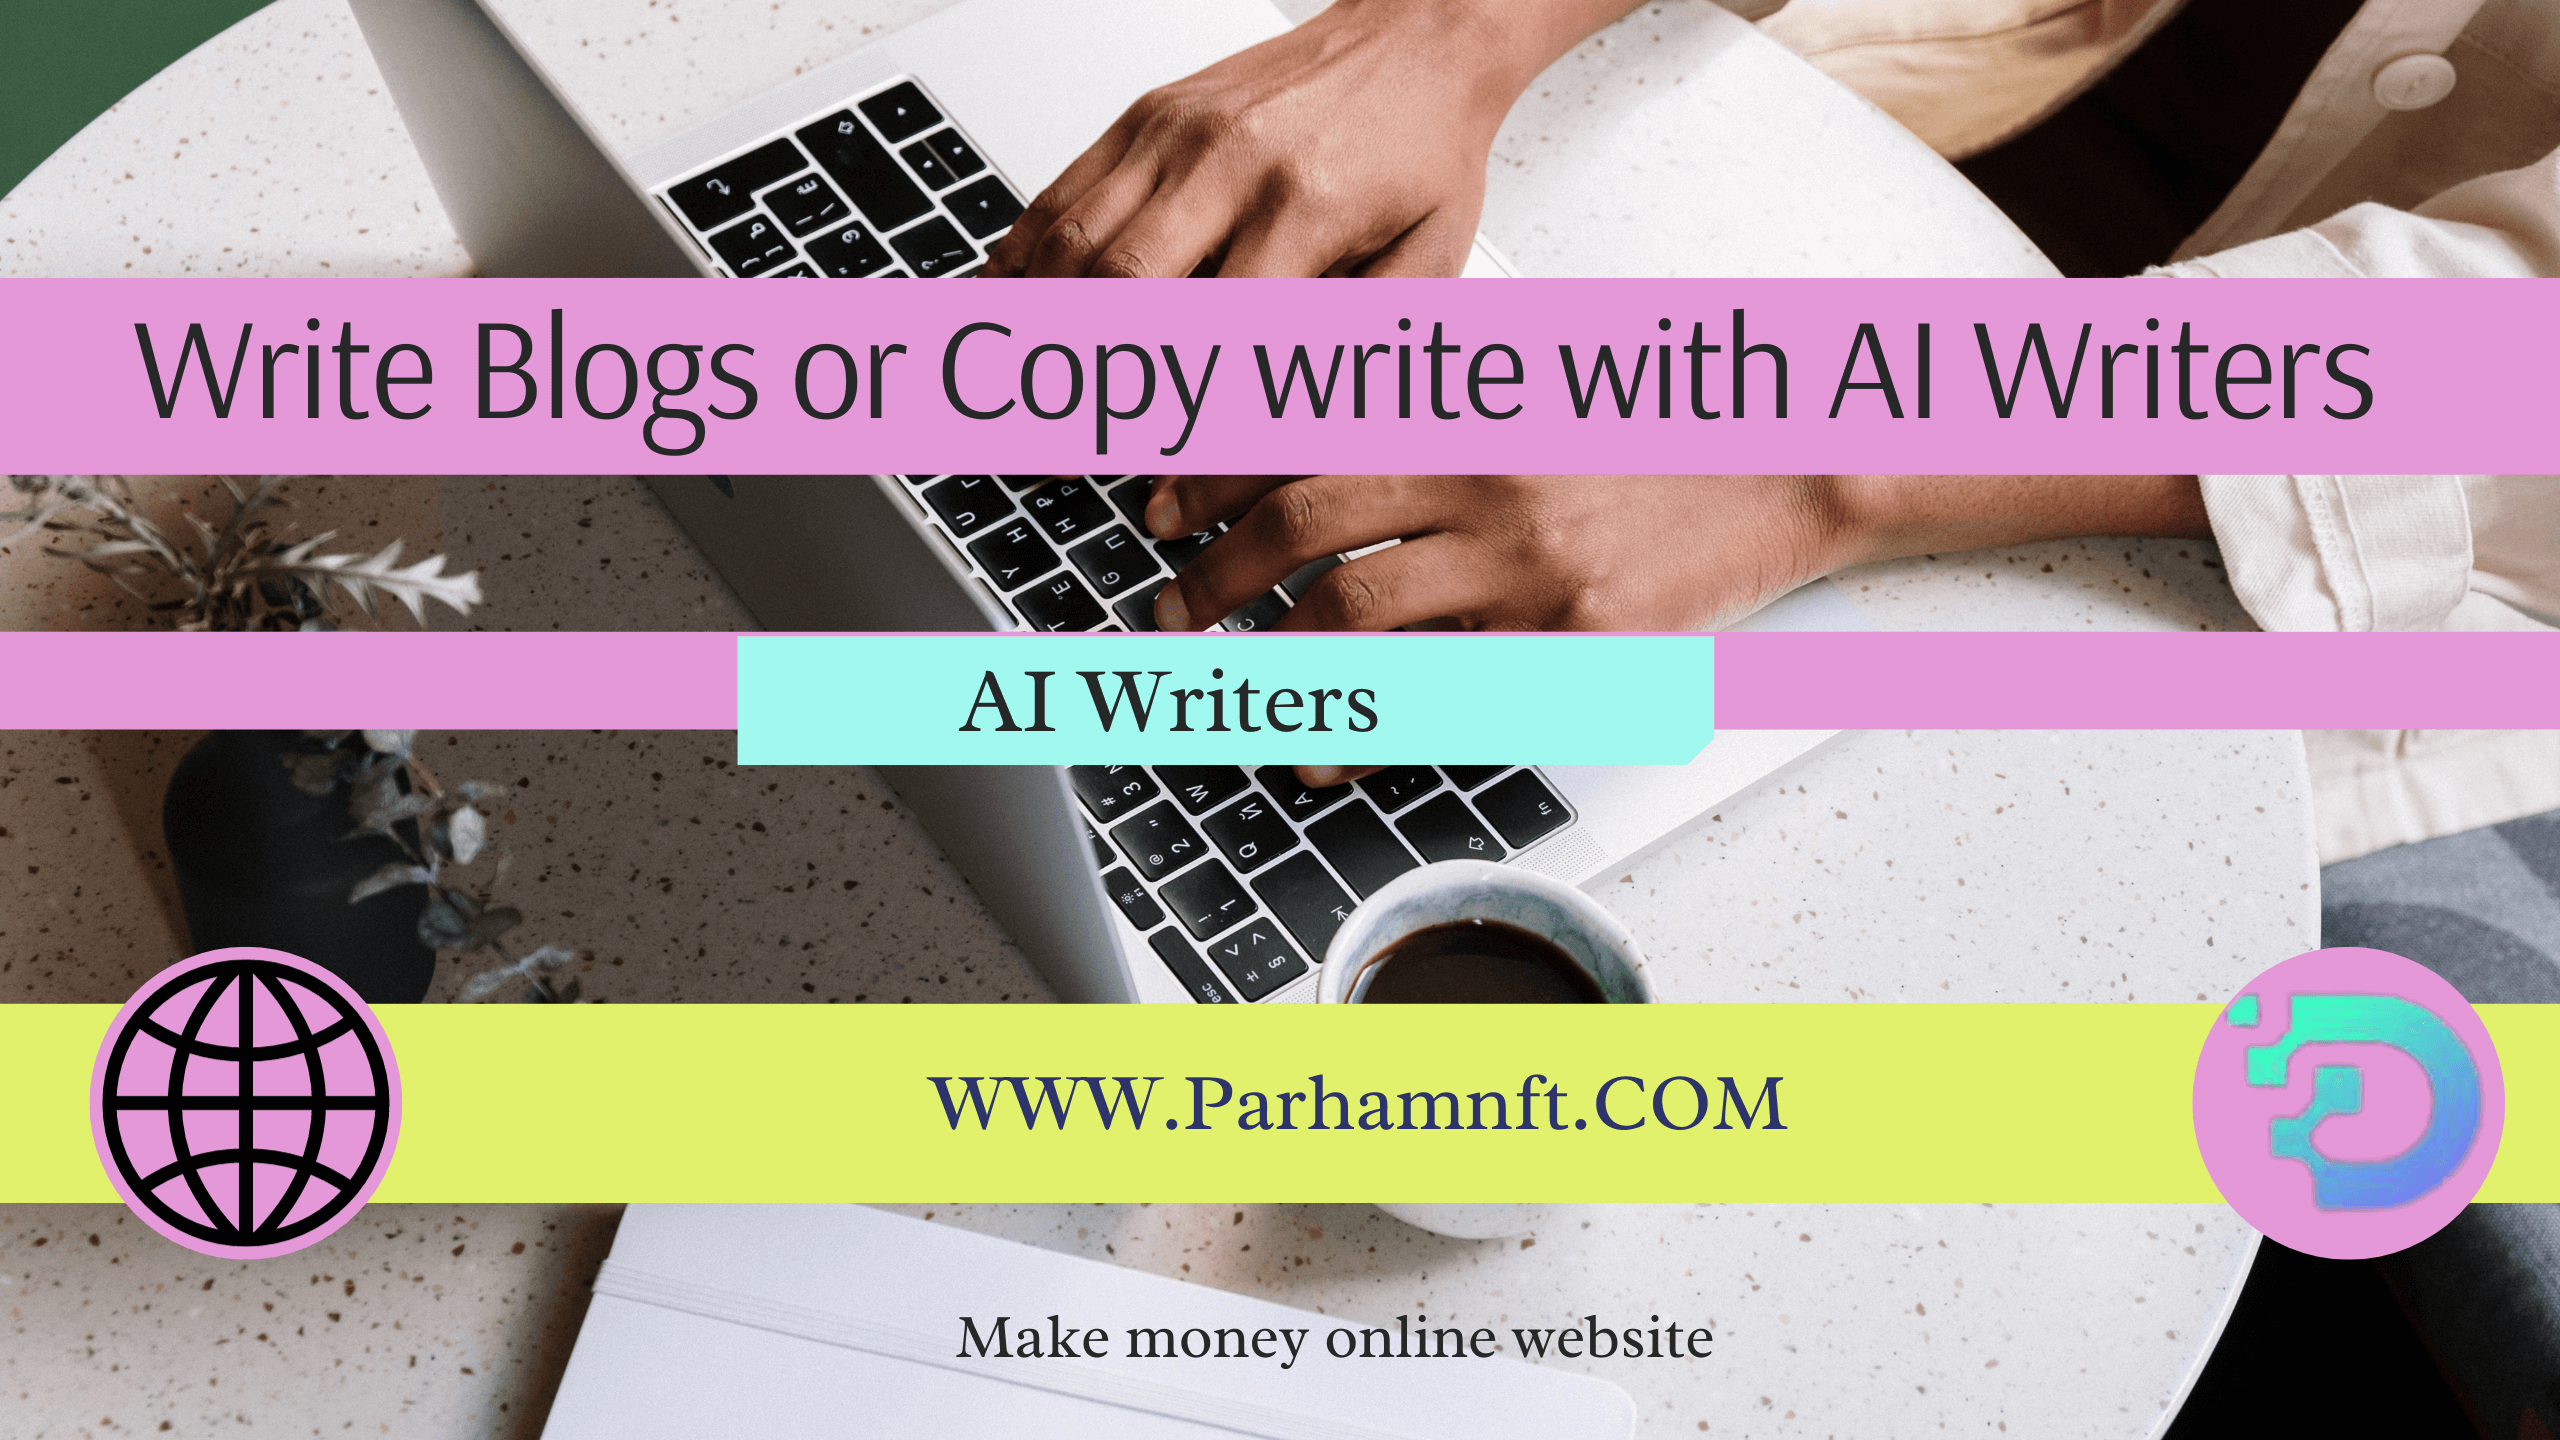 Write Blogs or Copy write with AI Writers